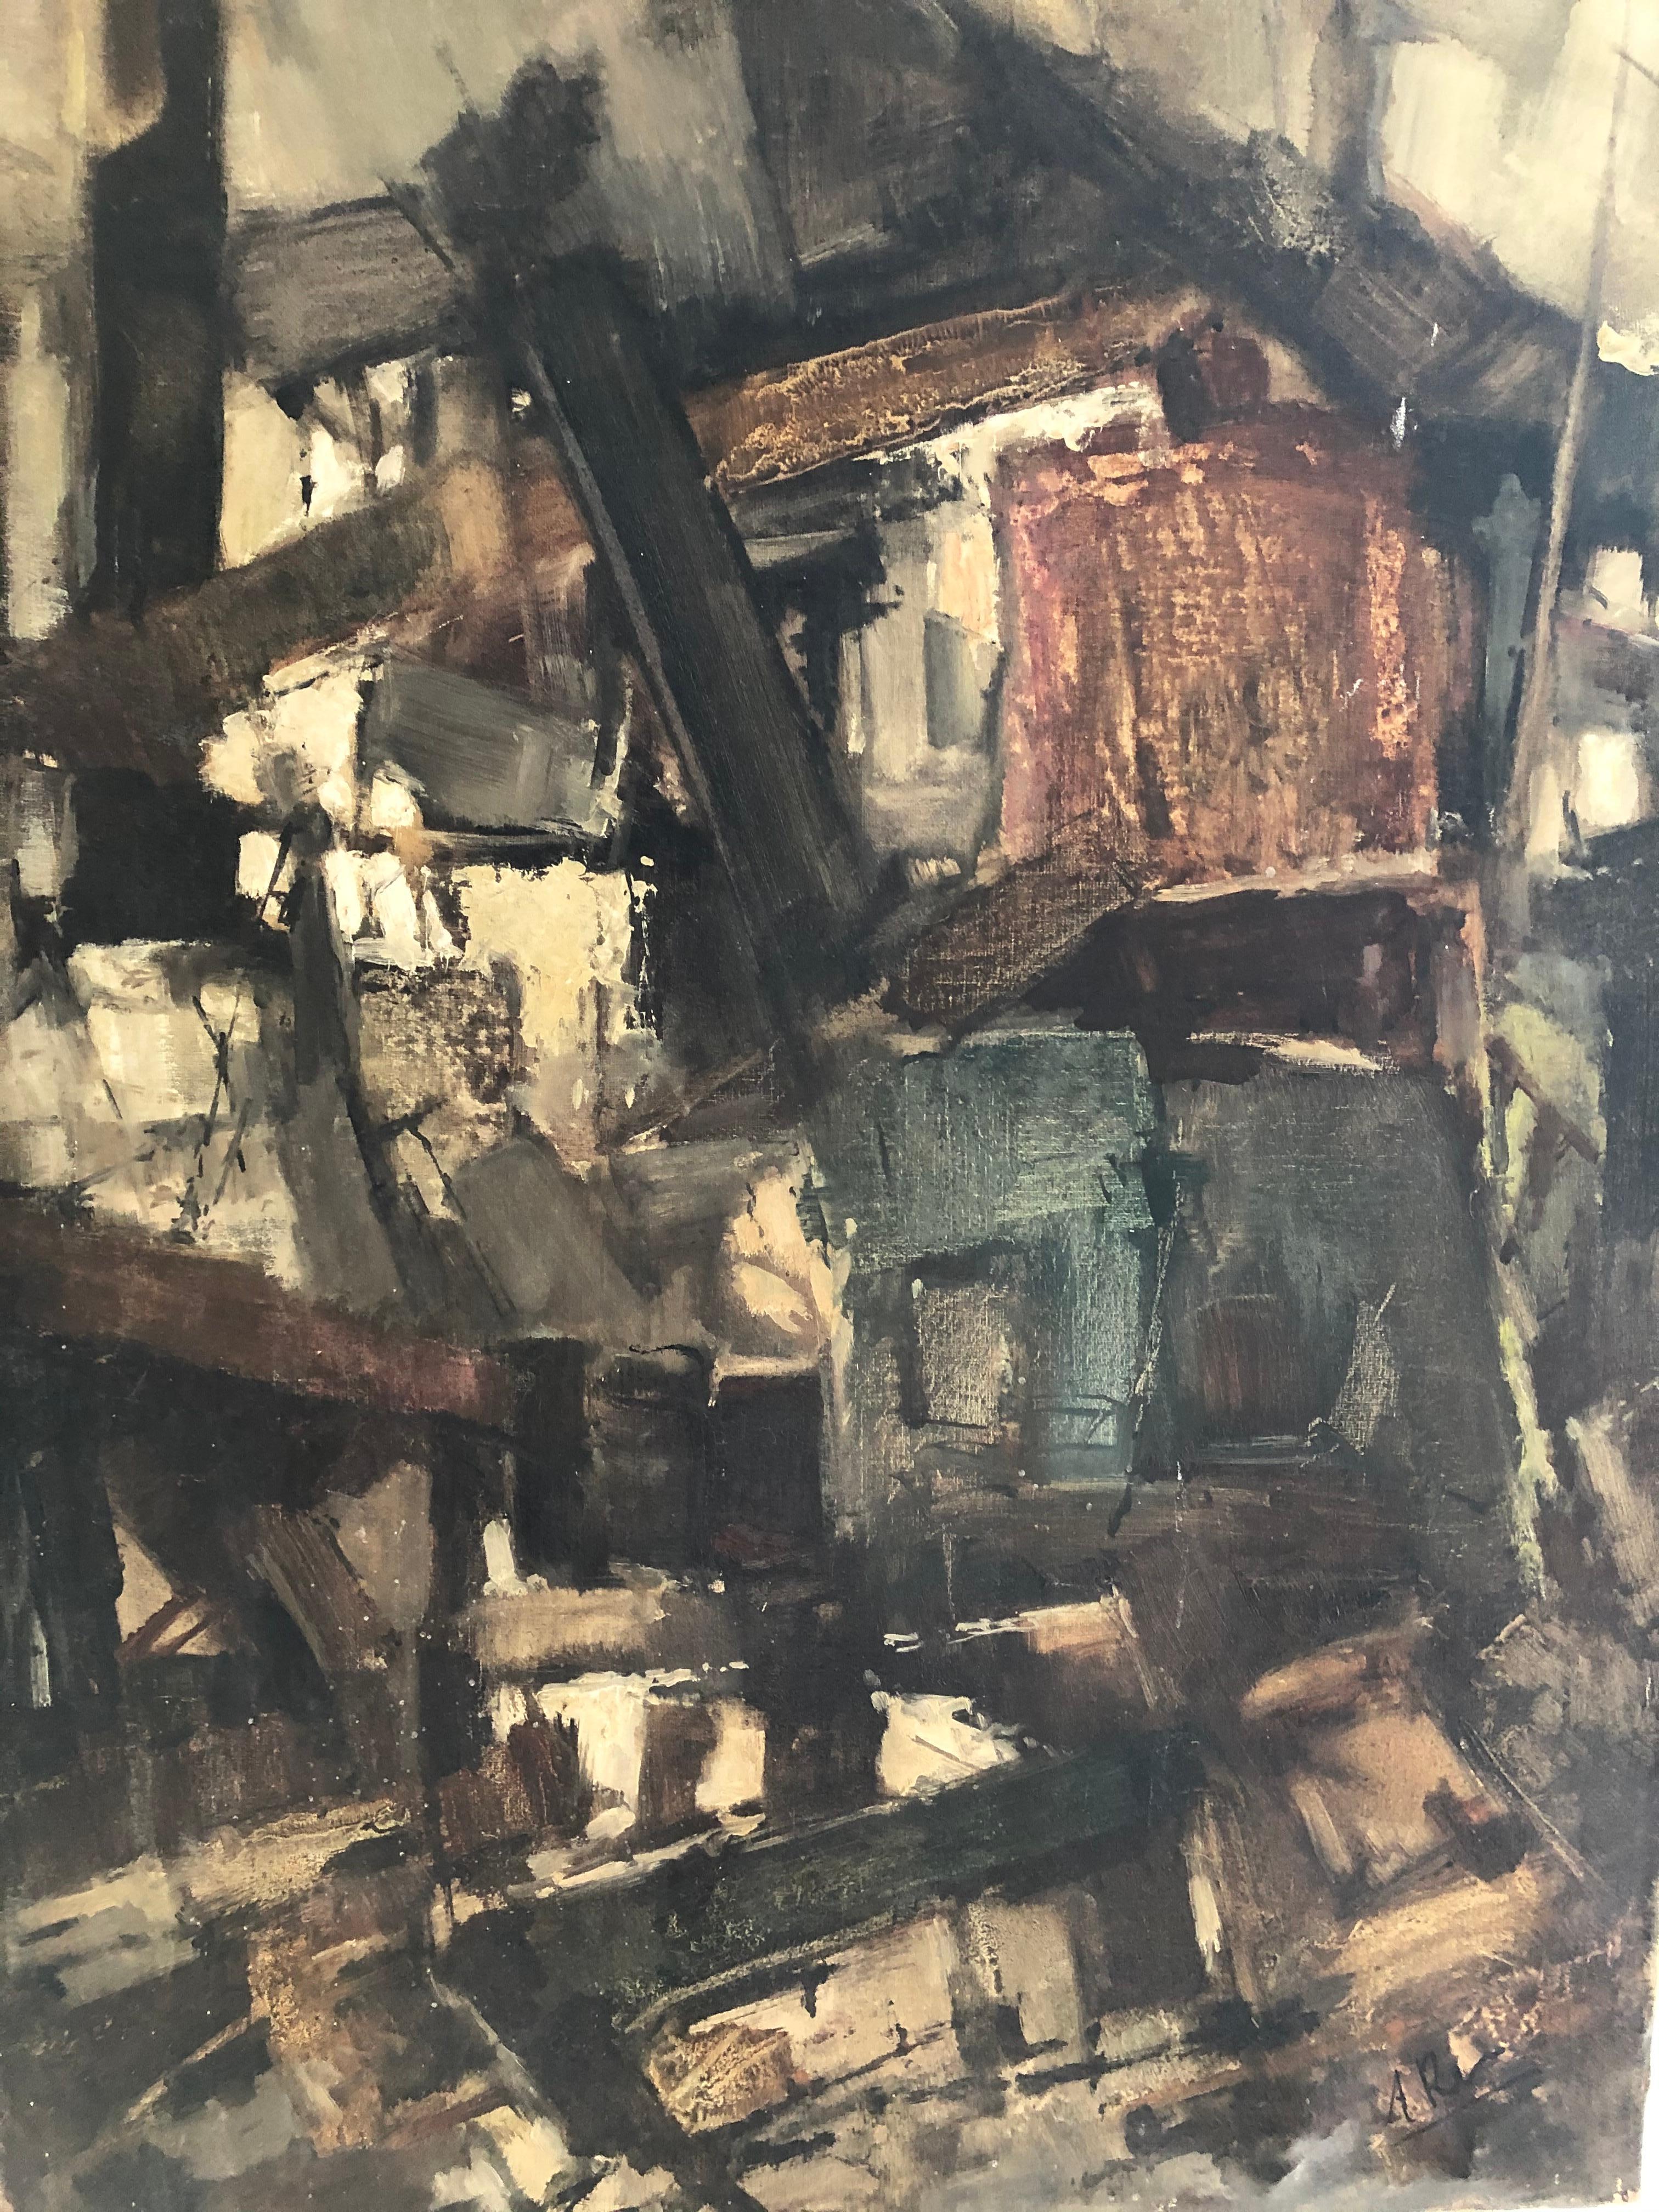 Unknown Abstract Painting - School or Style of Franz Kline and or Pierre Soulages  "La Cava" 